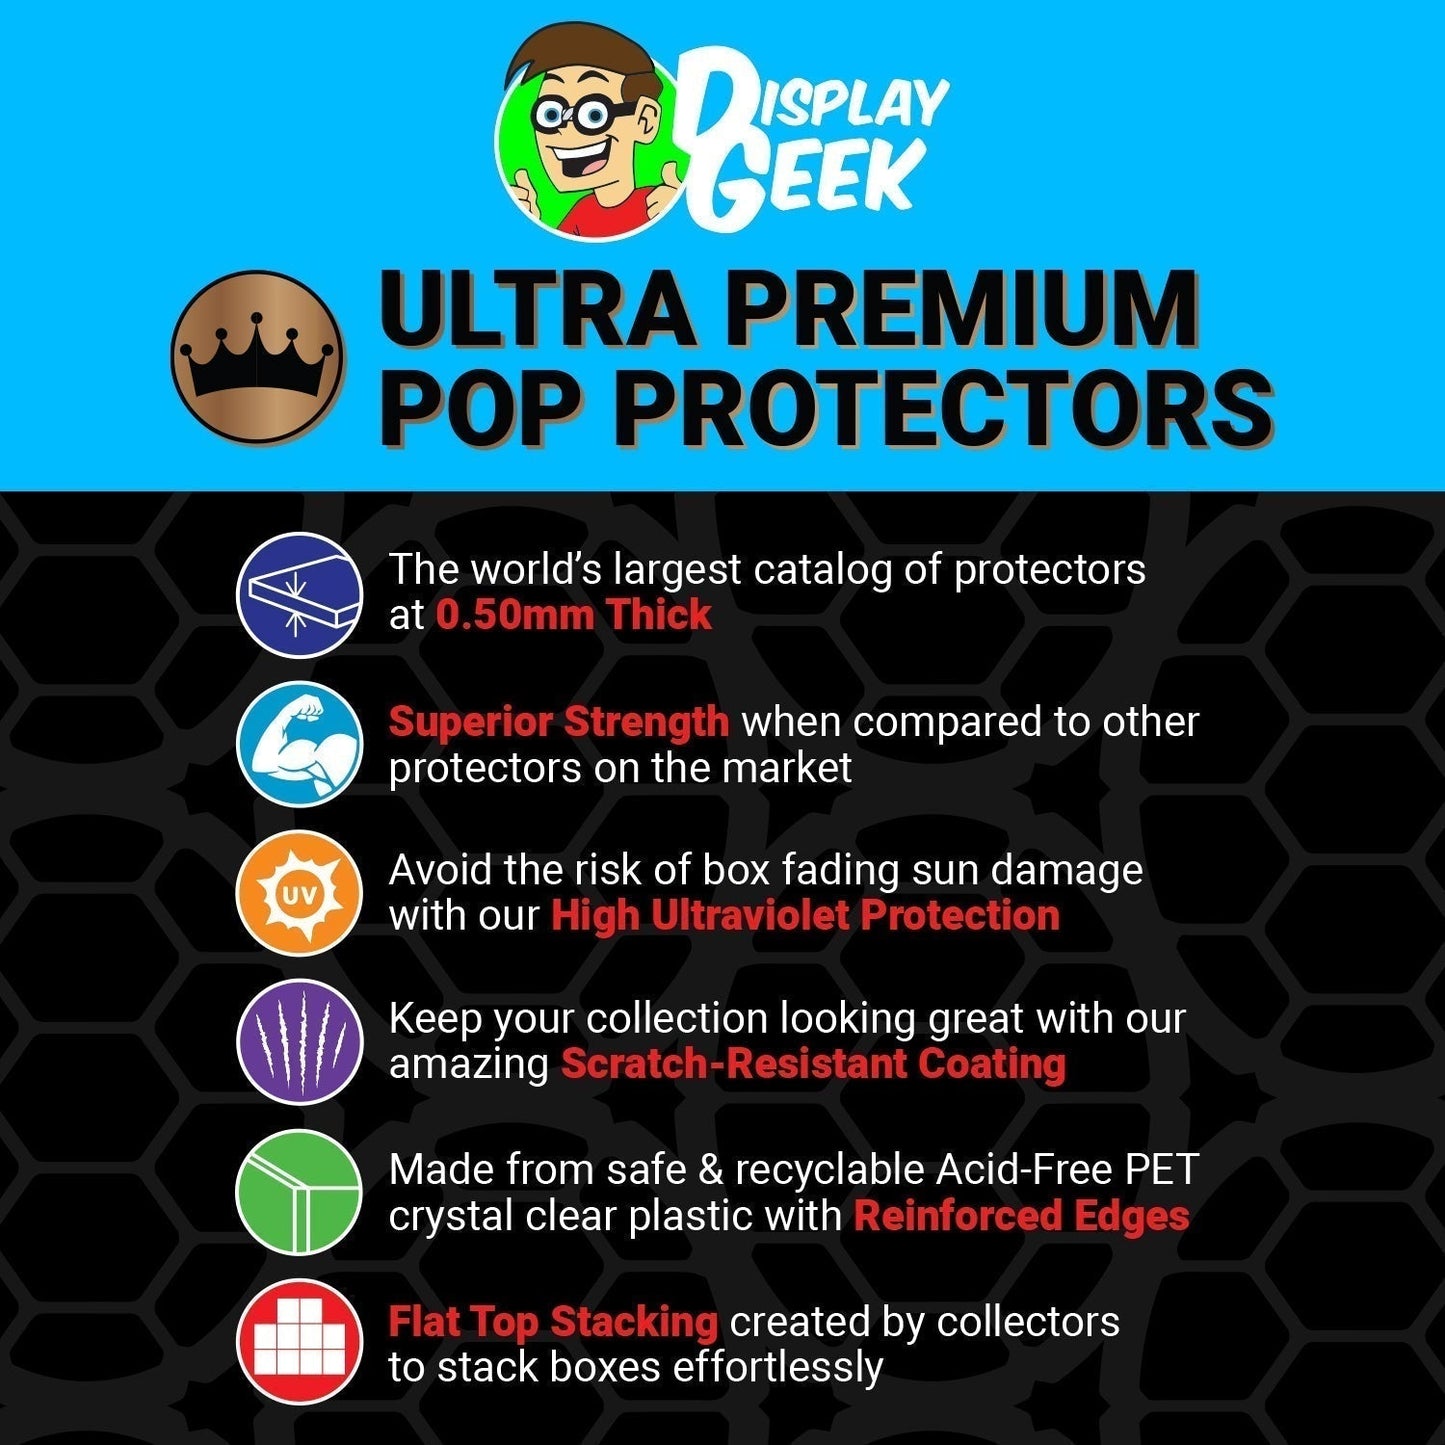 Pop Protector for Dolly Parton Backwoods Barbie #29 Funko Pop Albums - PPG Pop Protector Guide Search Created by Display Geek